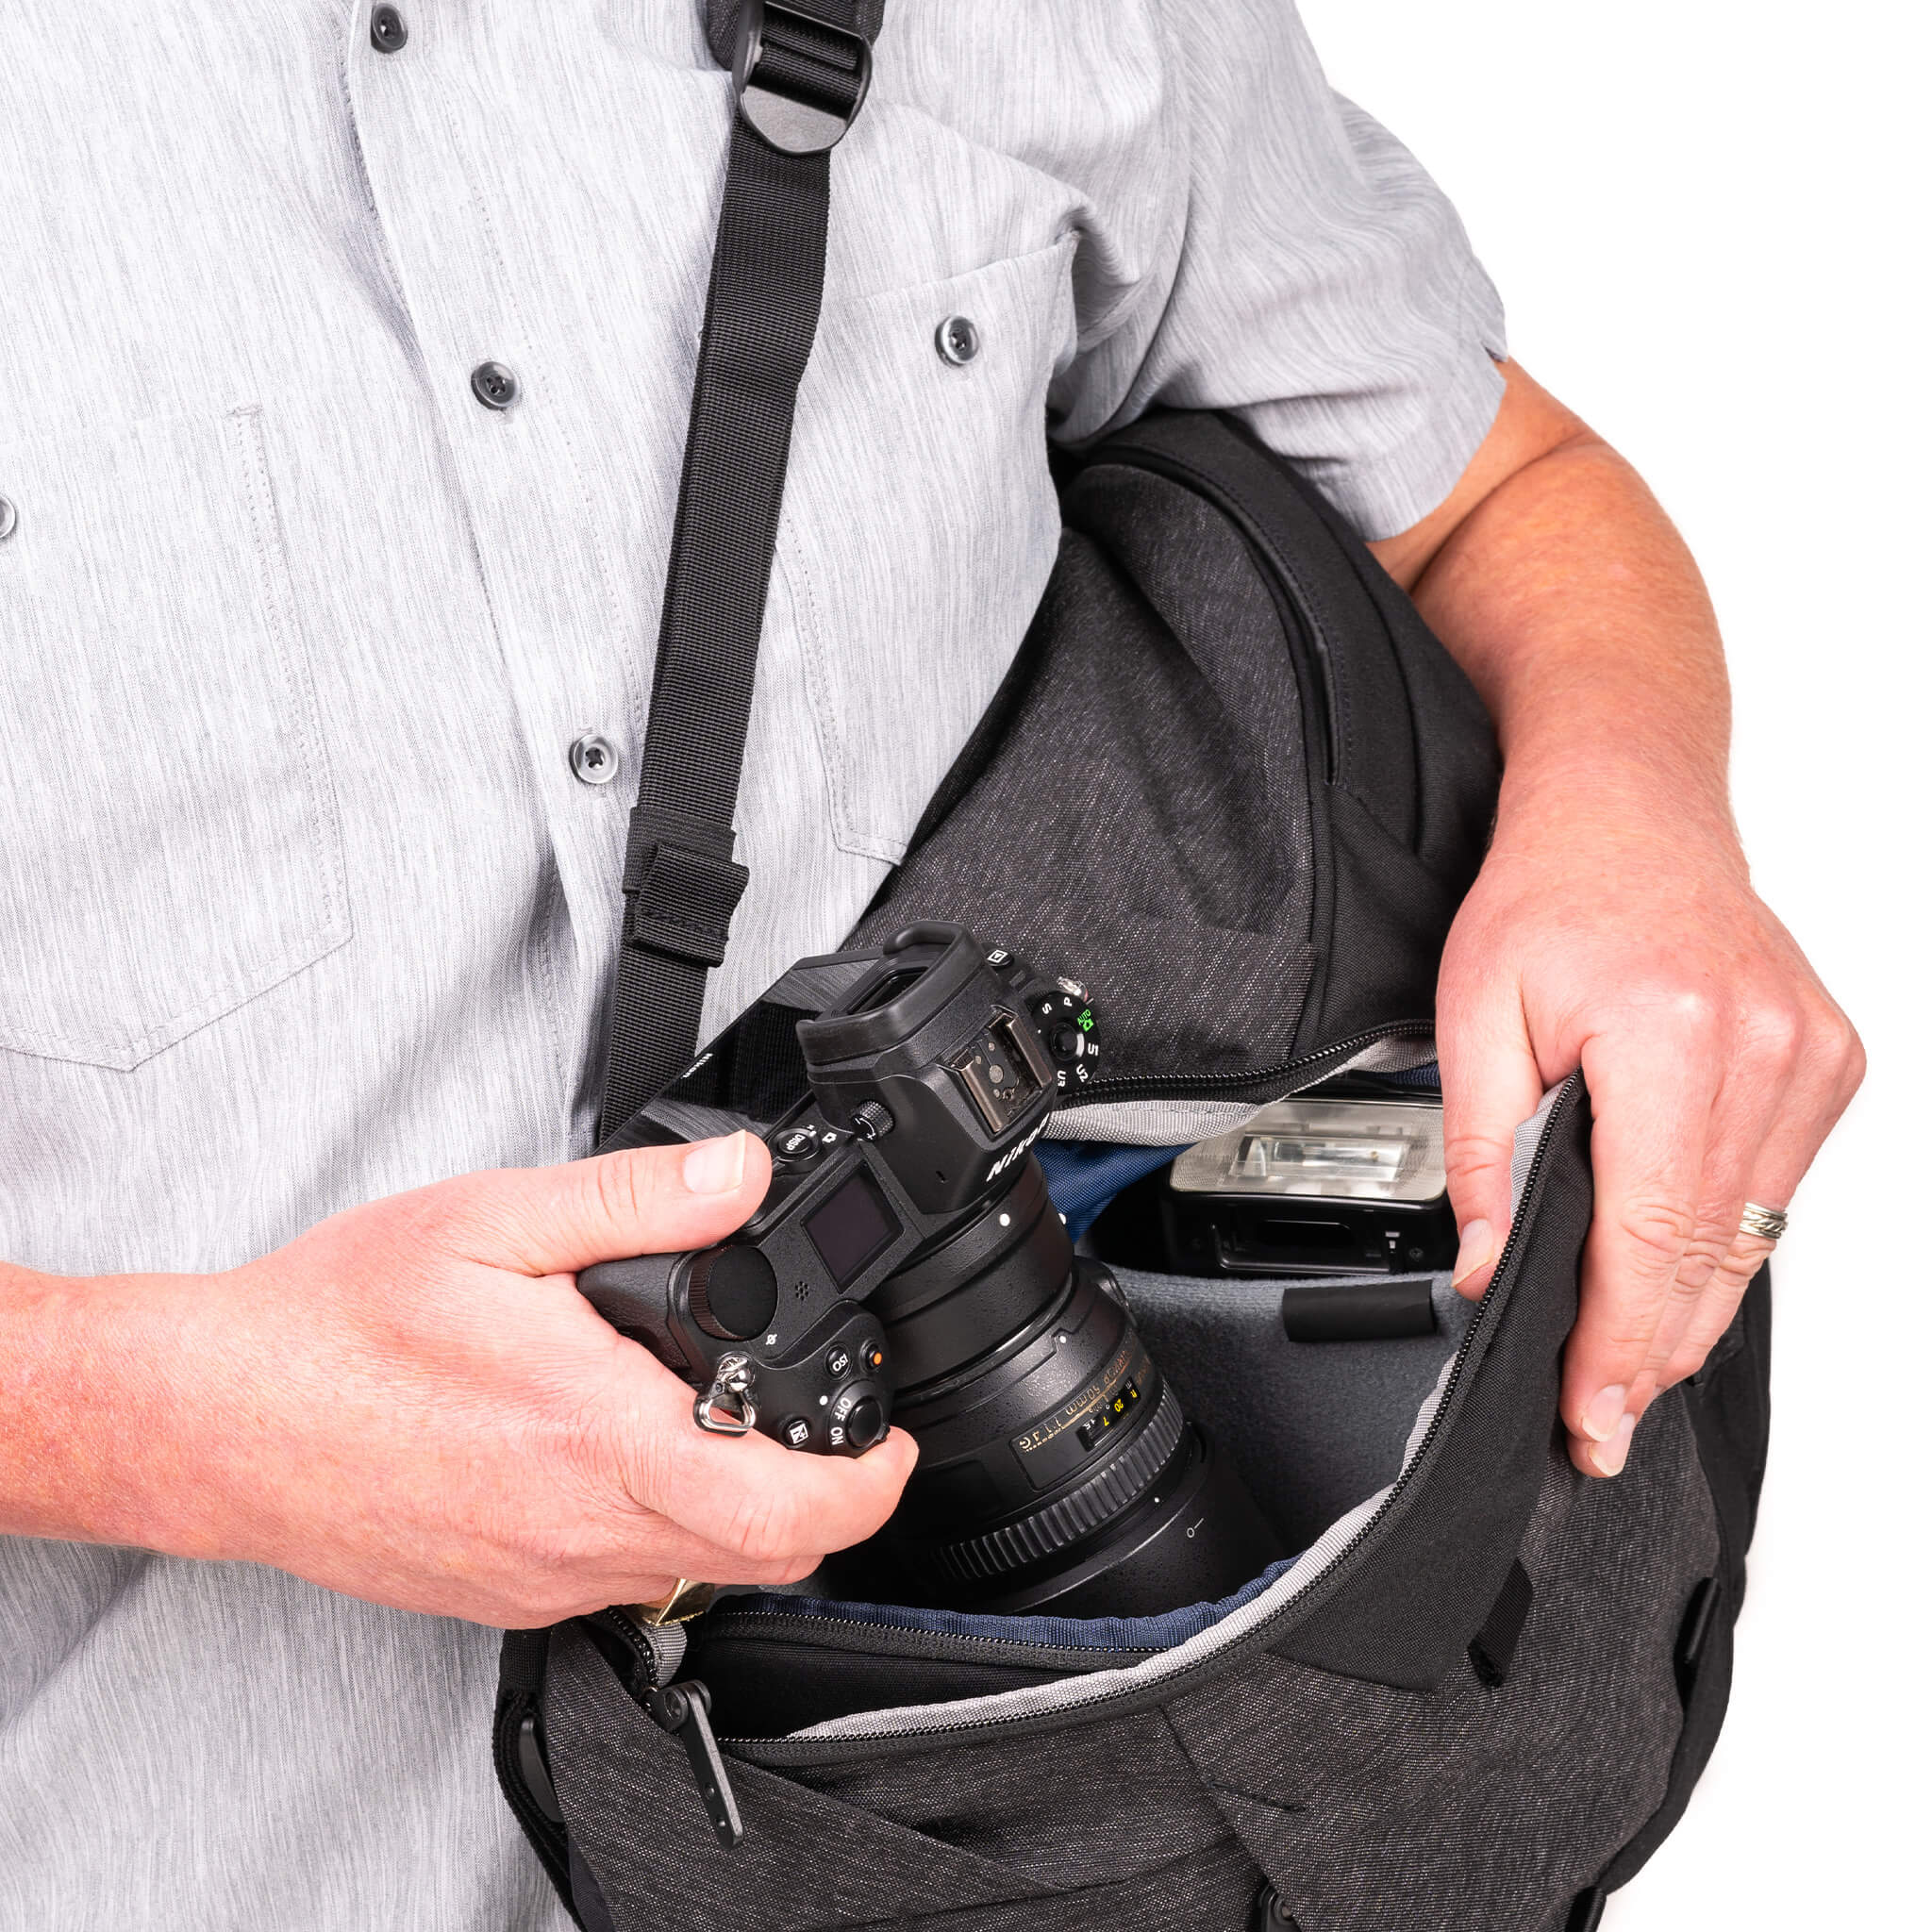 Lower compartment is easily accessed without taking off the backpack